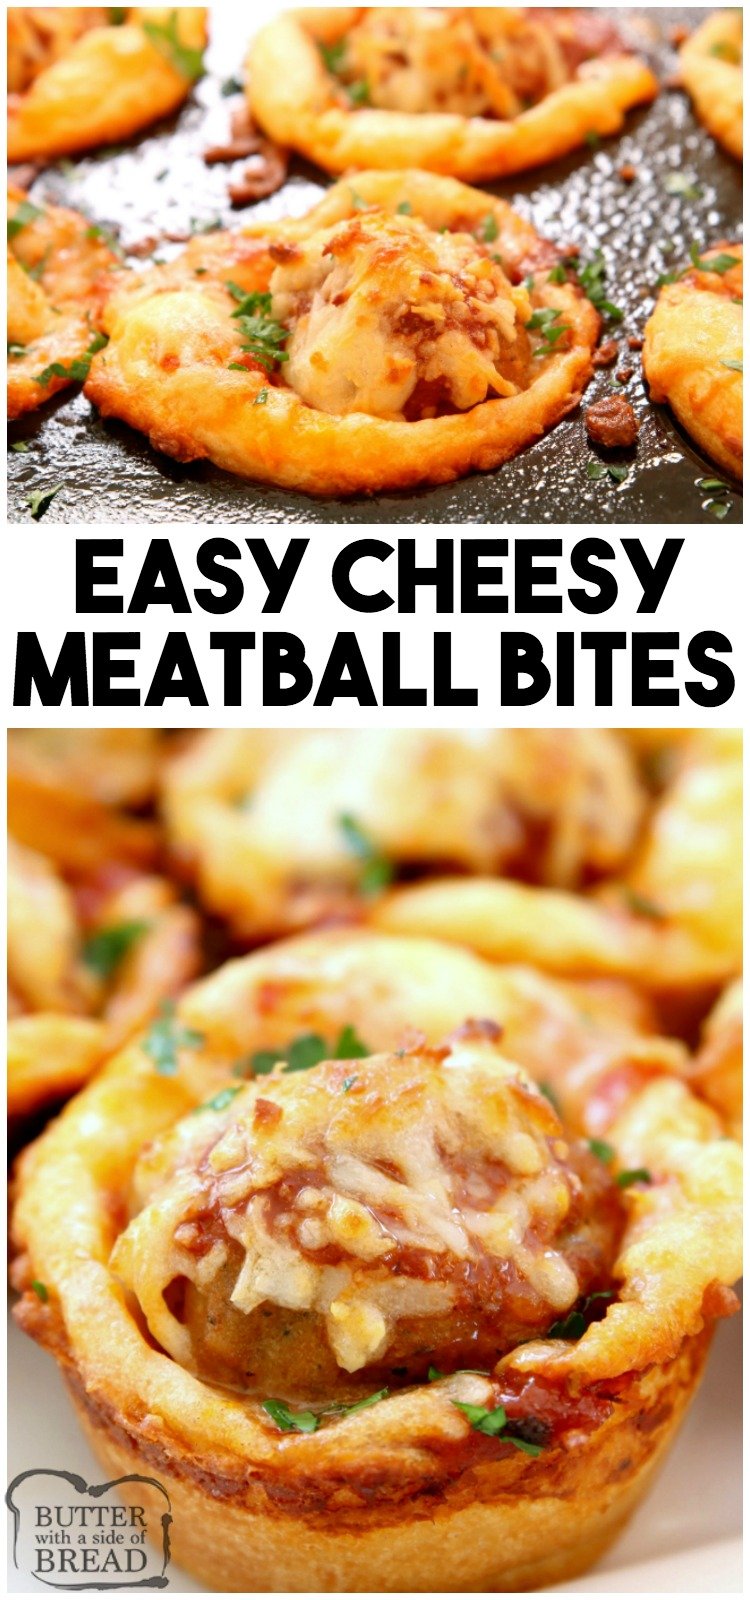 Cheesy Meatball Bites made with crescent dough, frozen meatballs, marinara sauce and lots of cheese! Easy meatball appetizer recipe perfect for parties & game day. #cheese #meatballs #appetizers #protein #beef #food #recipe